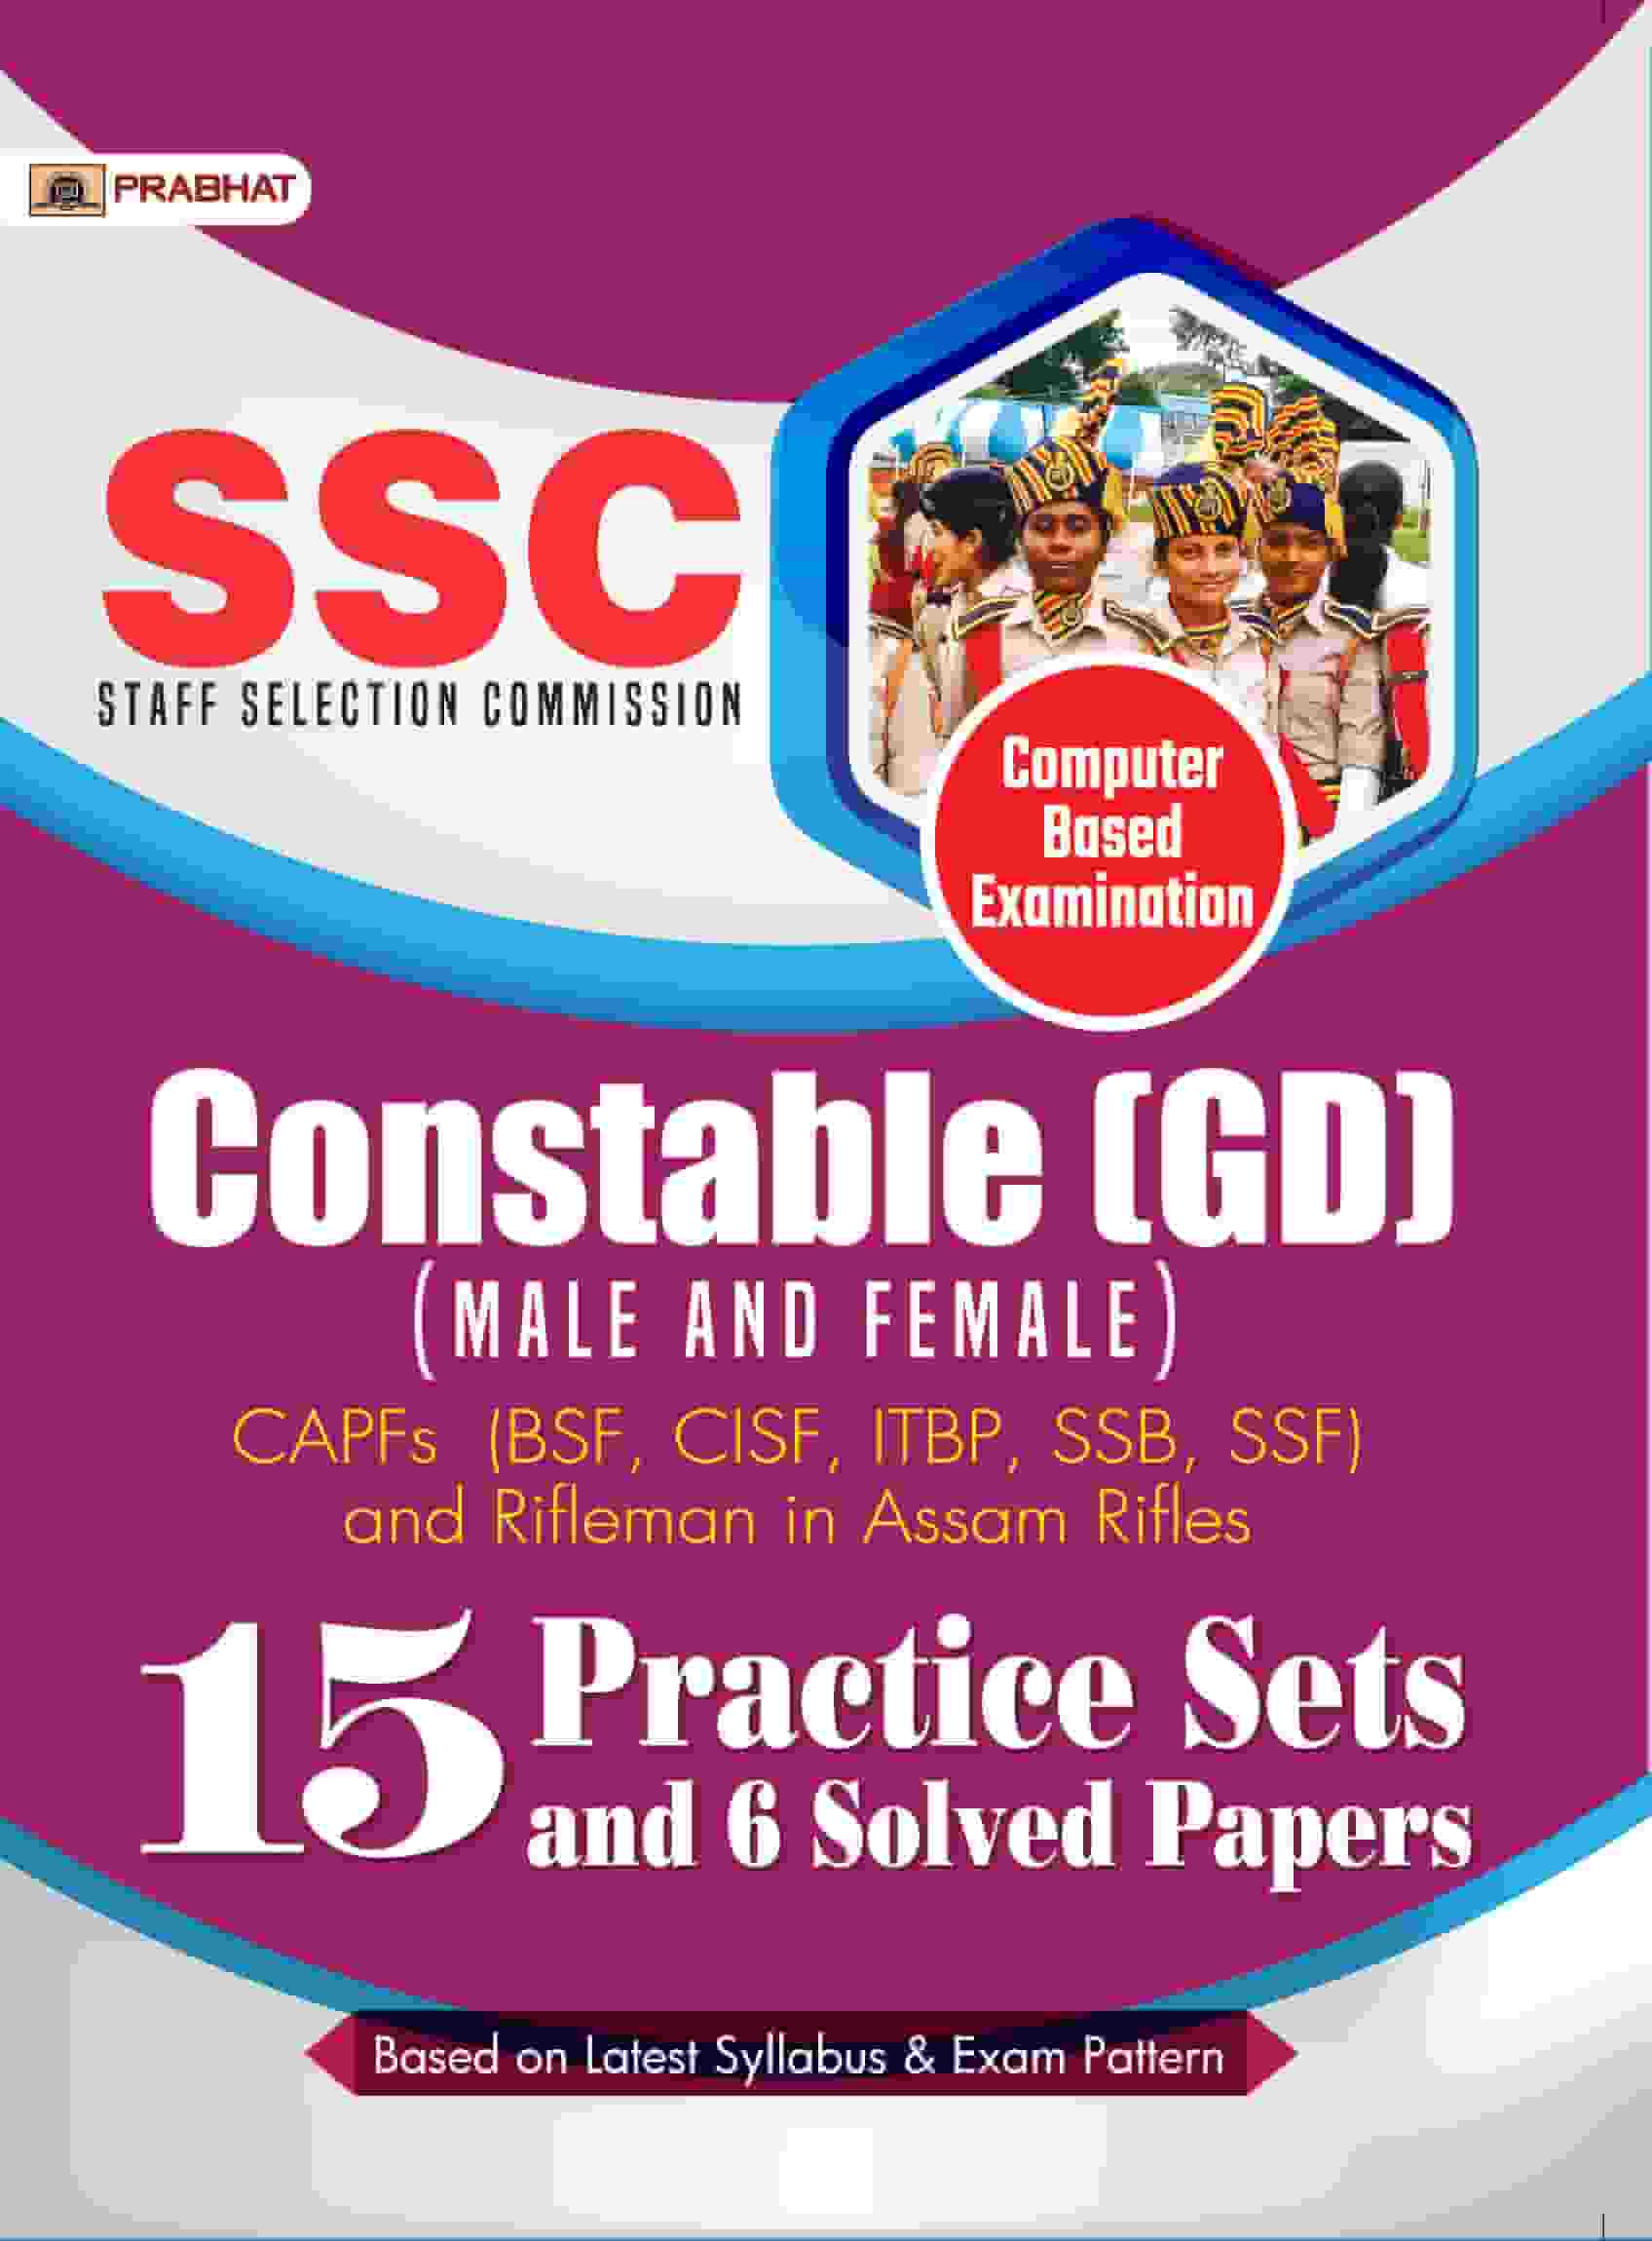 SSC Staff Selection Commission Constable (GD)...